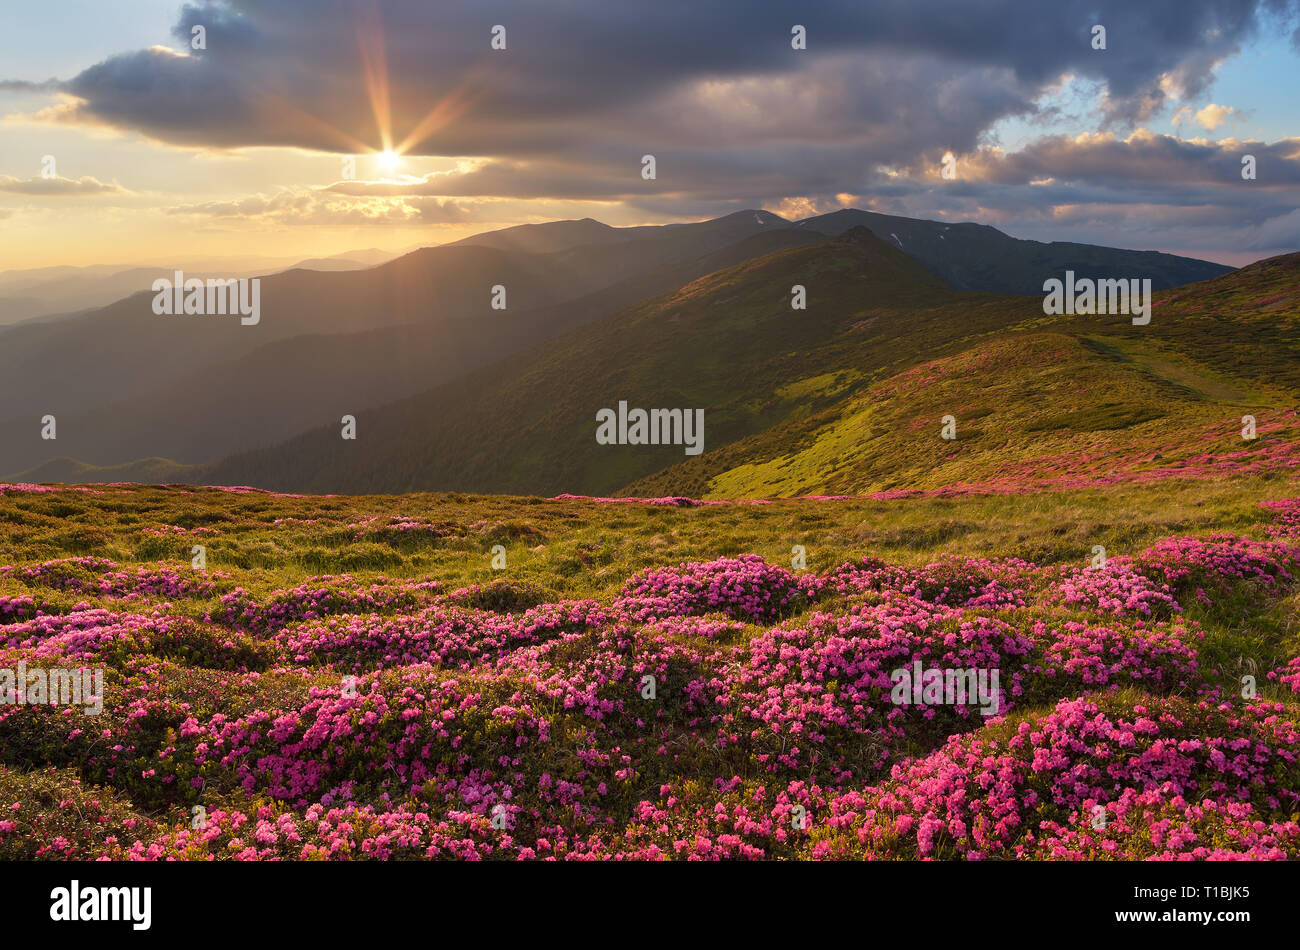 Summer mountain landscape with flowers on a slope. Beautiful evening with the sunset. Carpathians, Ukraine, Europe Stock Photo